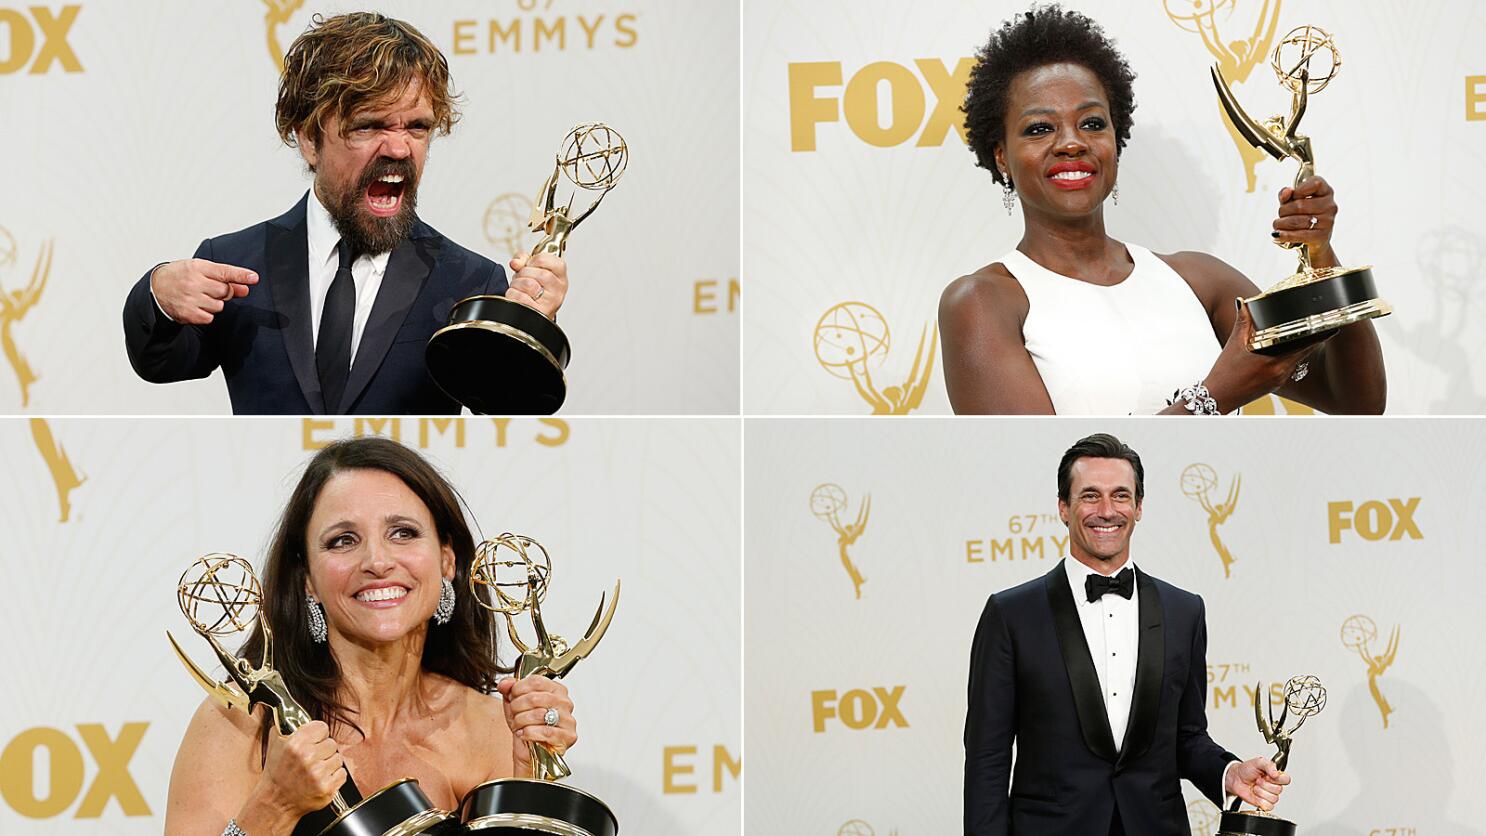 Game of Thrones', 'Veep' take top prizes again at Emmys